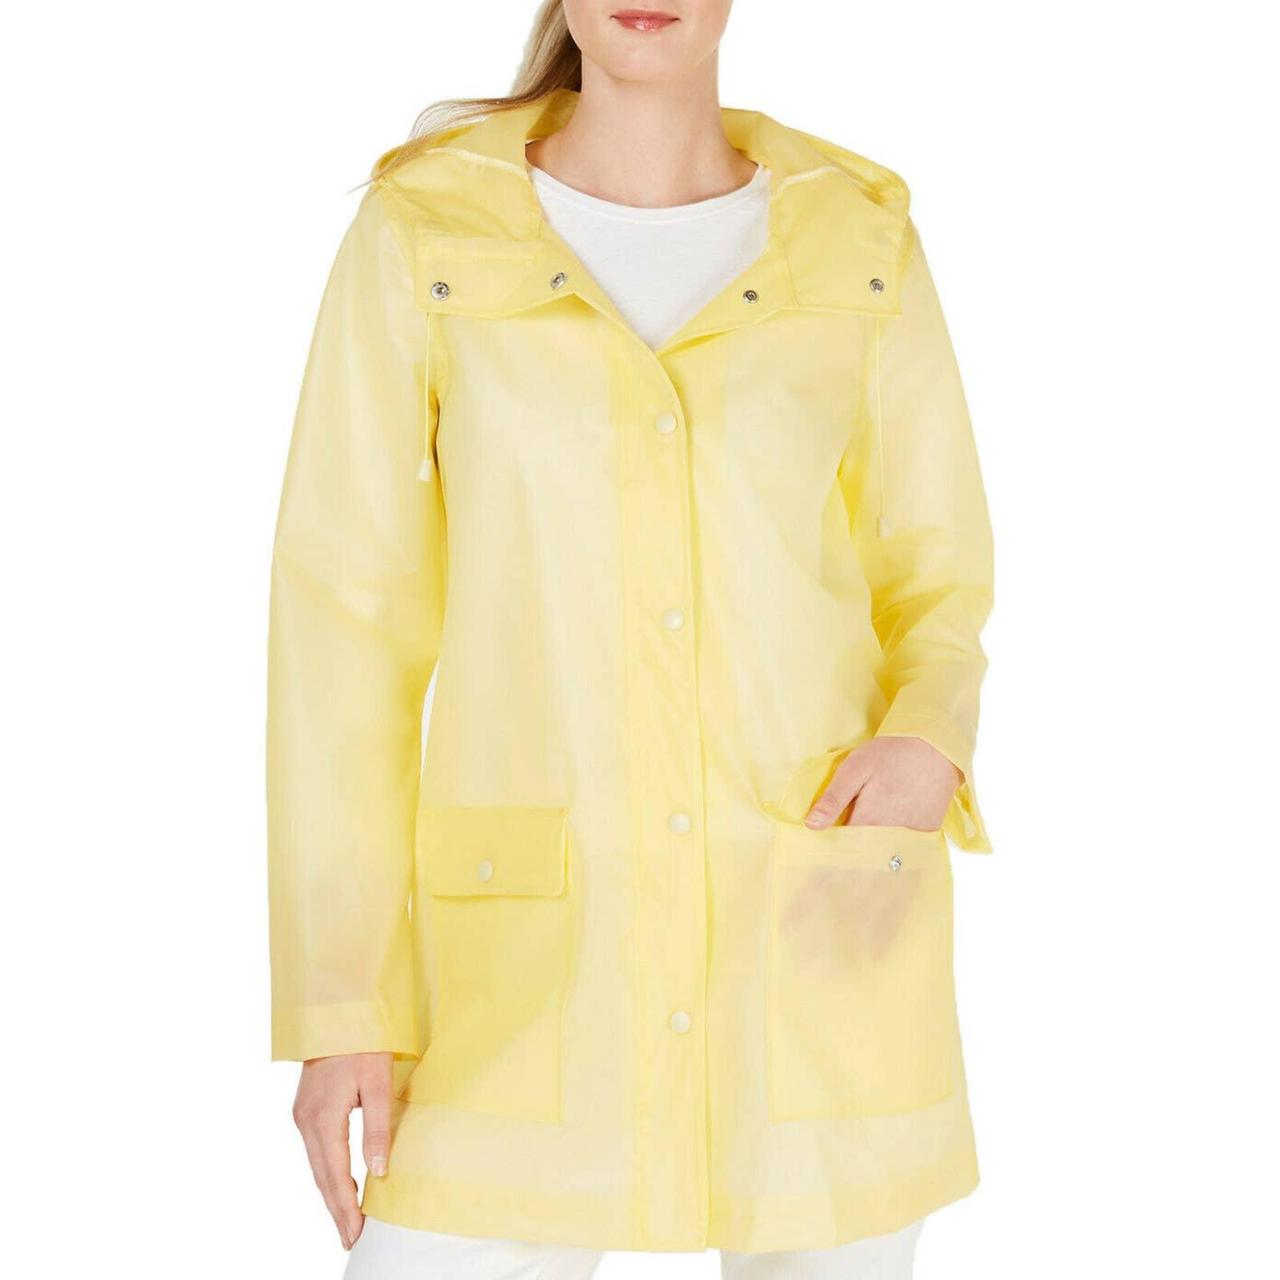 Product Image 3 - COLLECTION B WOMEN'S YELLOW HOODED